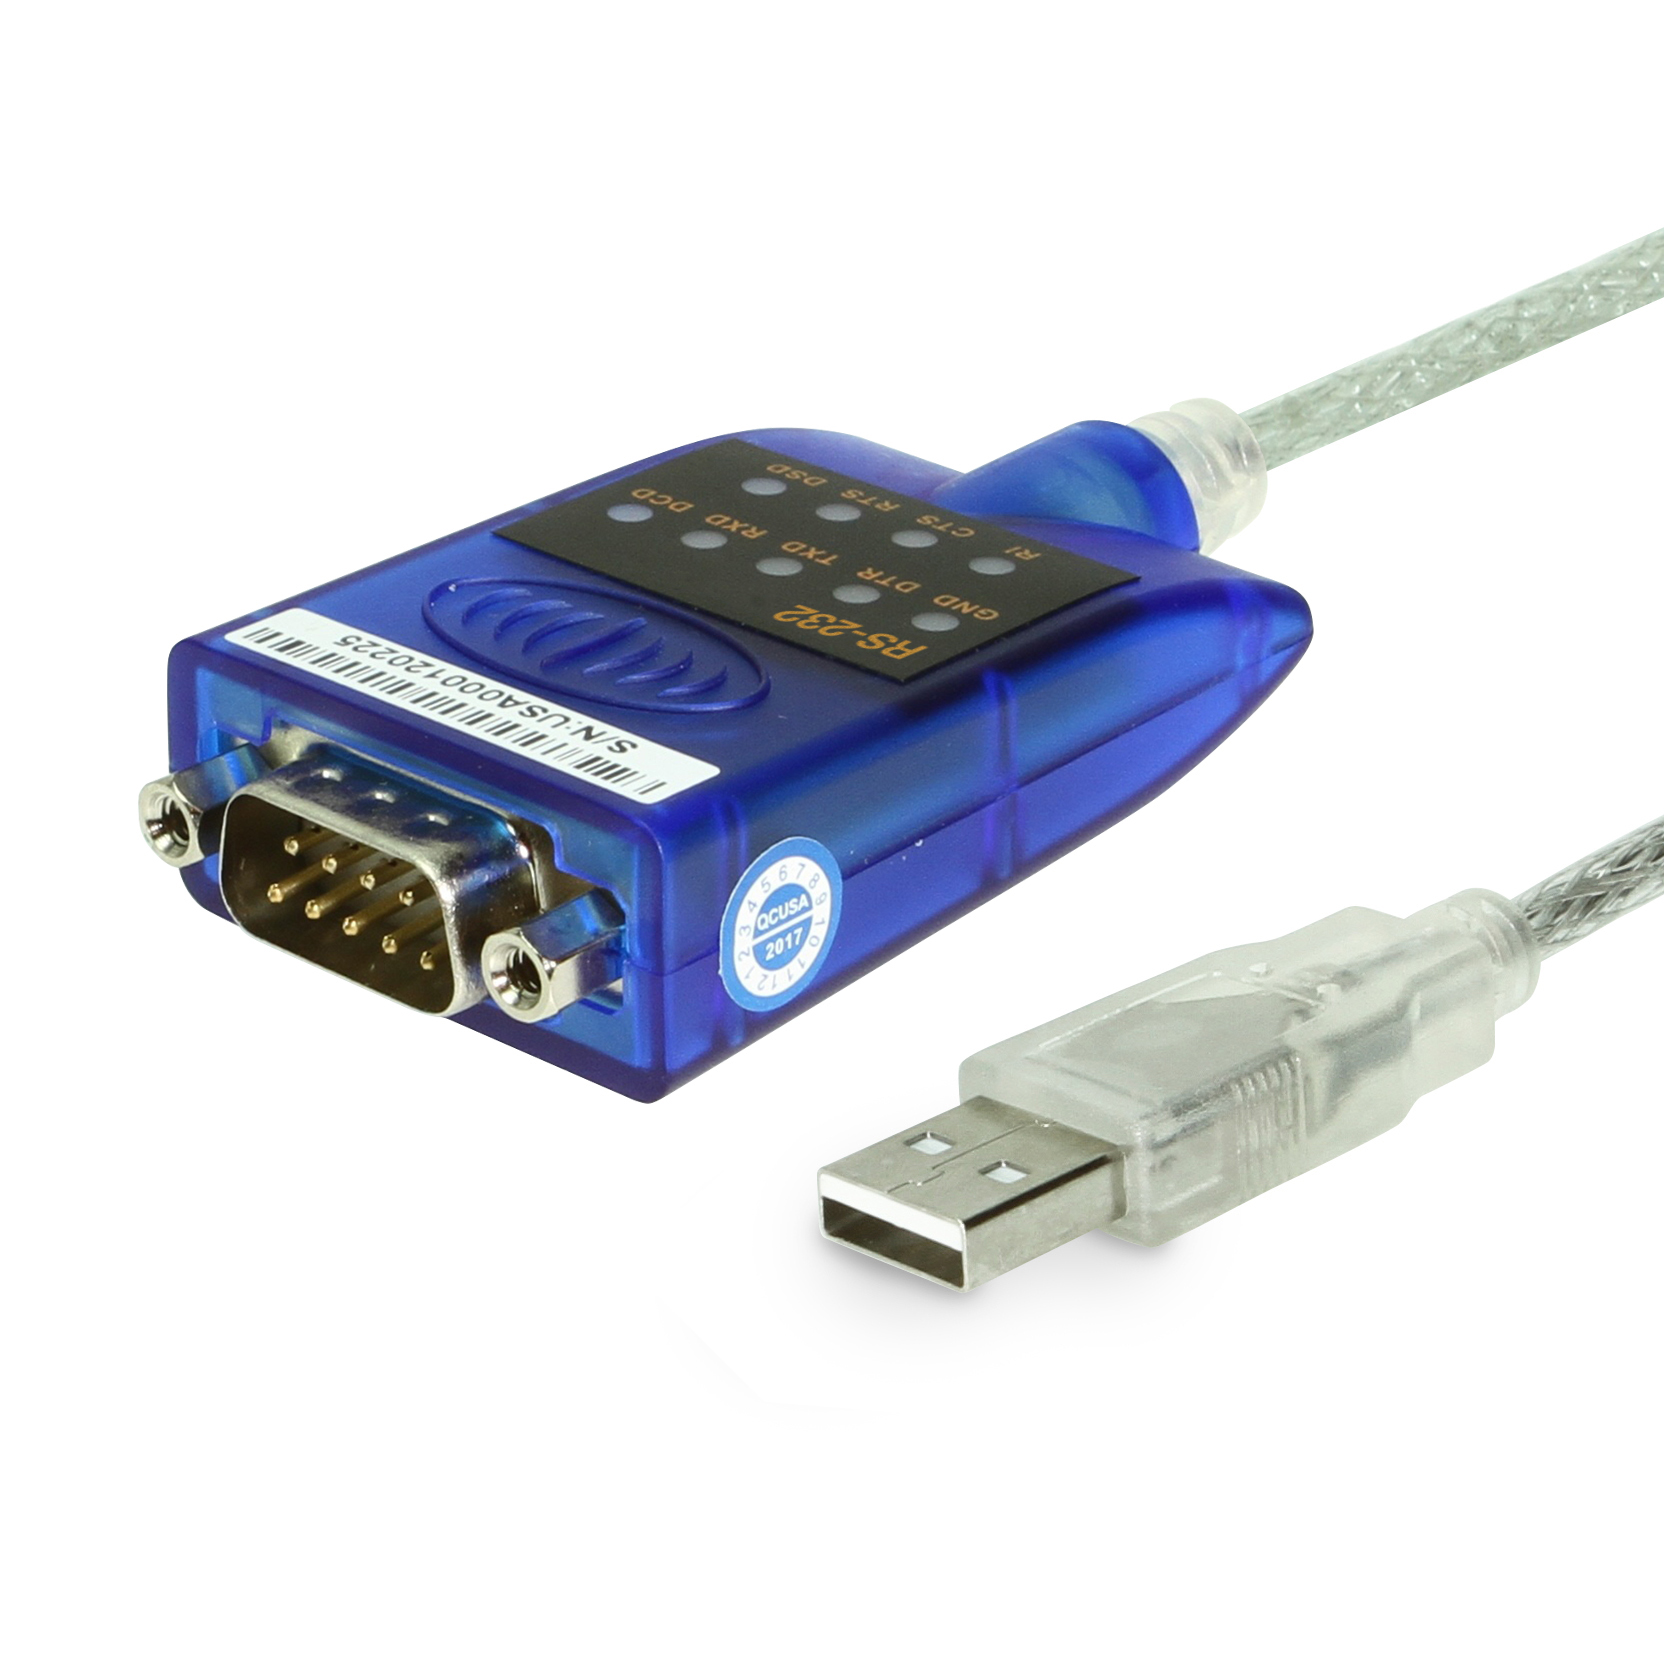 USB 2.0 RS-232 Serial Adapter with